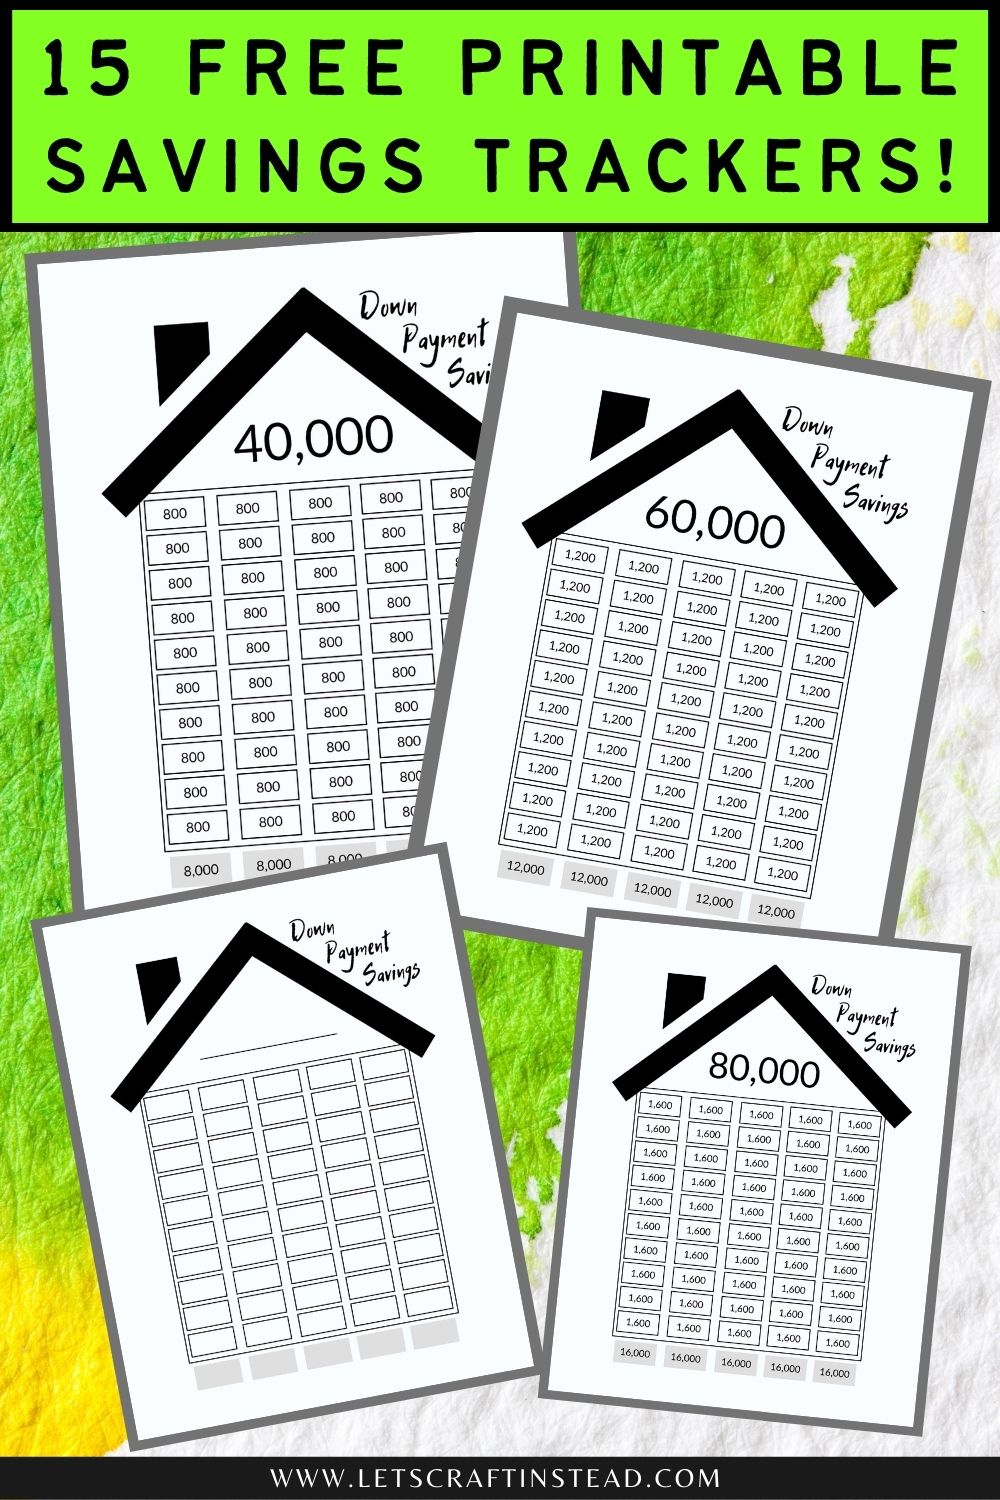 15-totally-free-printable-savings-trackers-for-instant-download